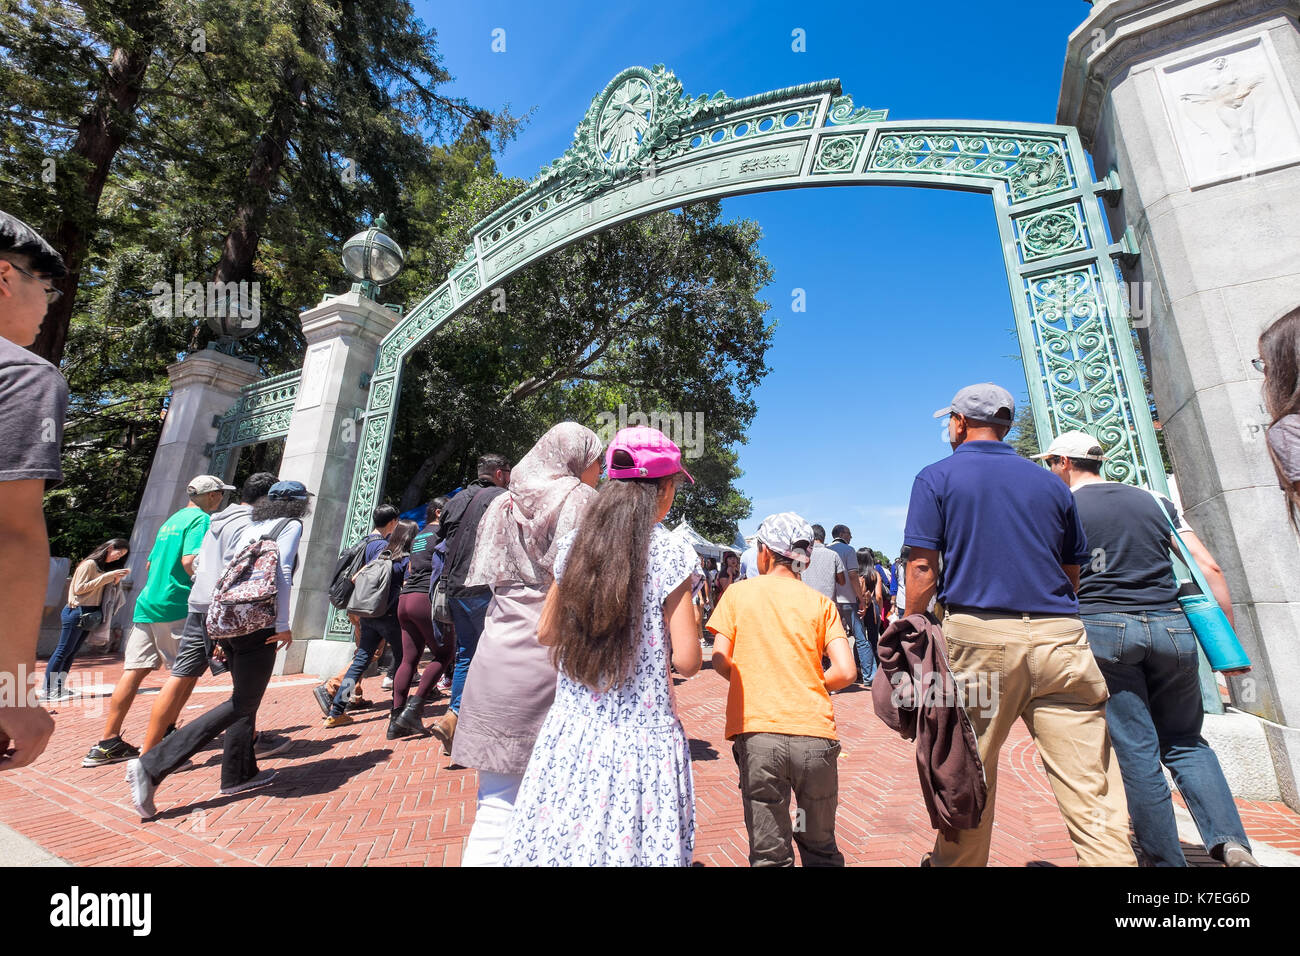 University of California Berkeley alumni, students and visitors on campus for Cal Day, the annual open house, shown passing through famous Sather Gate. Stock Photo